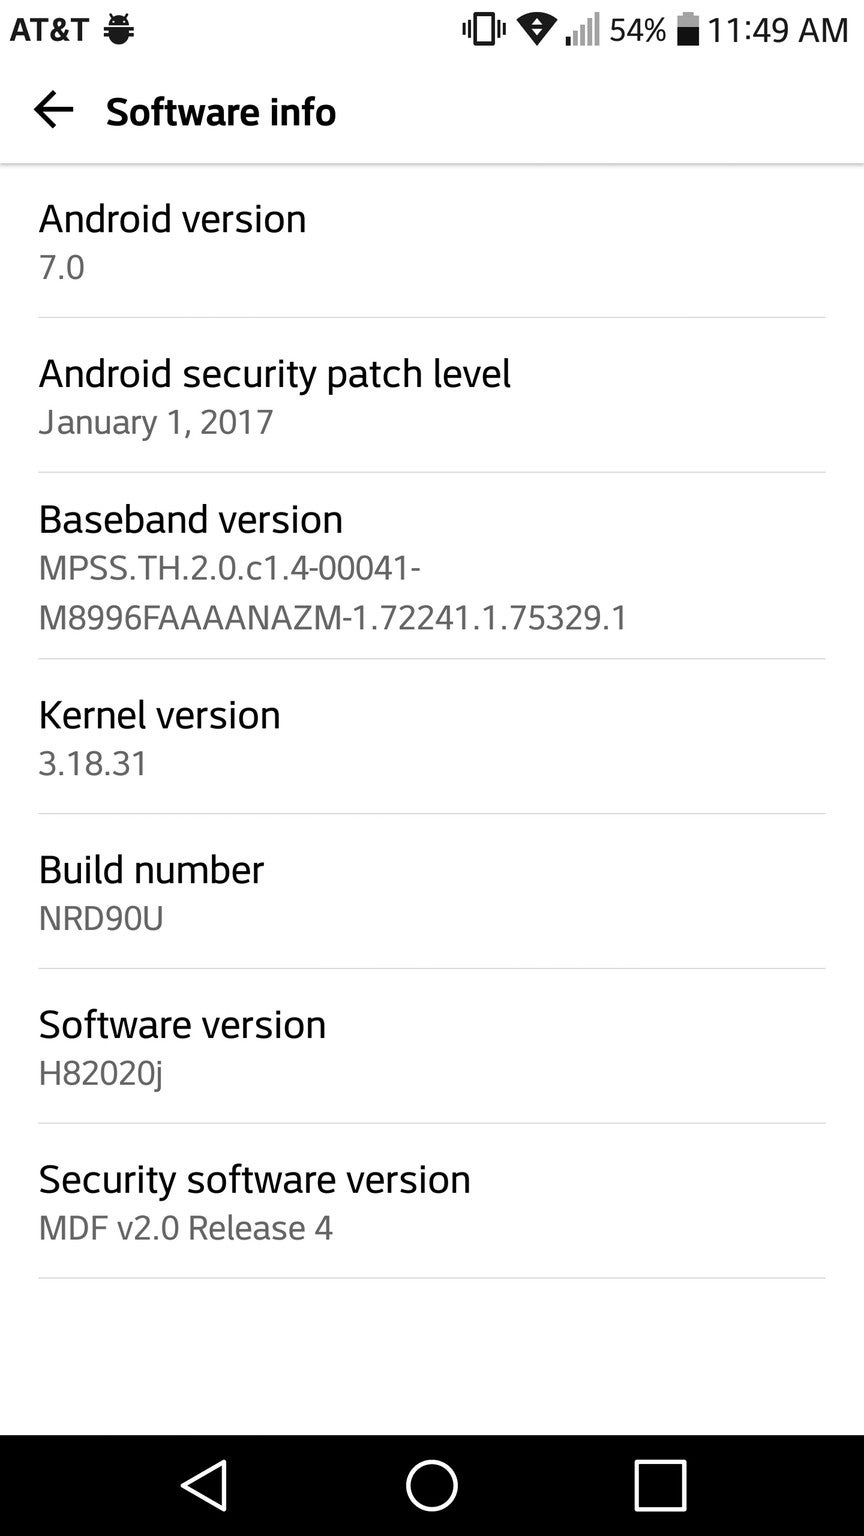 Android 7.0 Nougat for AT&amp;amp;T LG G5 - AT&amp;T starts rolling out Android 7.0 Nougat update for LG G5